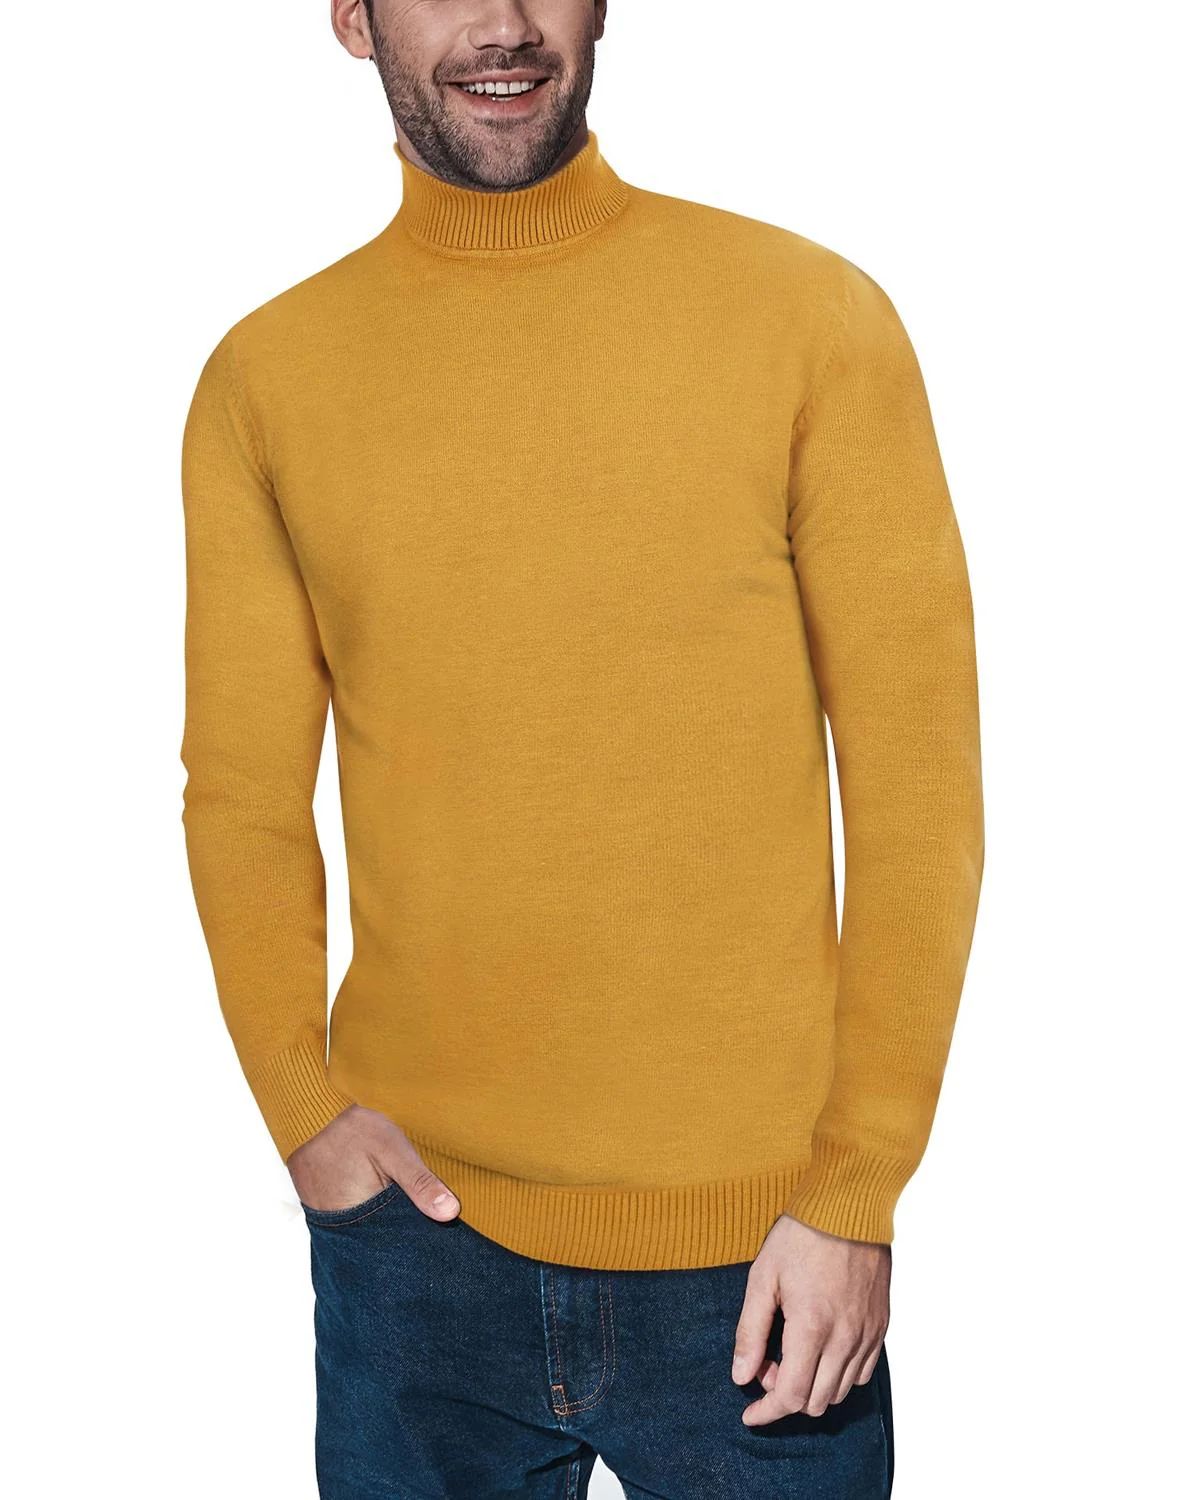 XRAY Men's Turtleneck Sweater in Mustard Large Lord & Taylor | Lord & Taylor